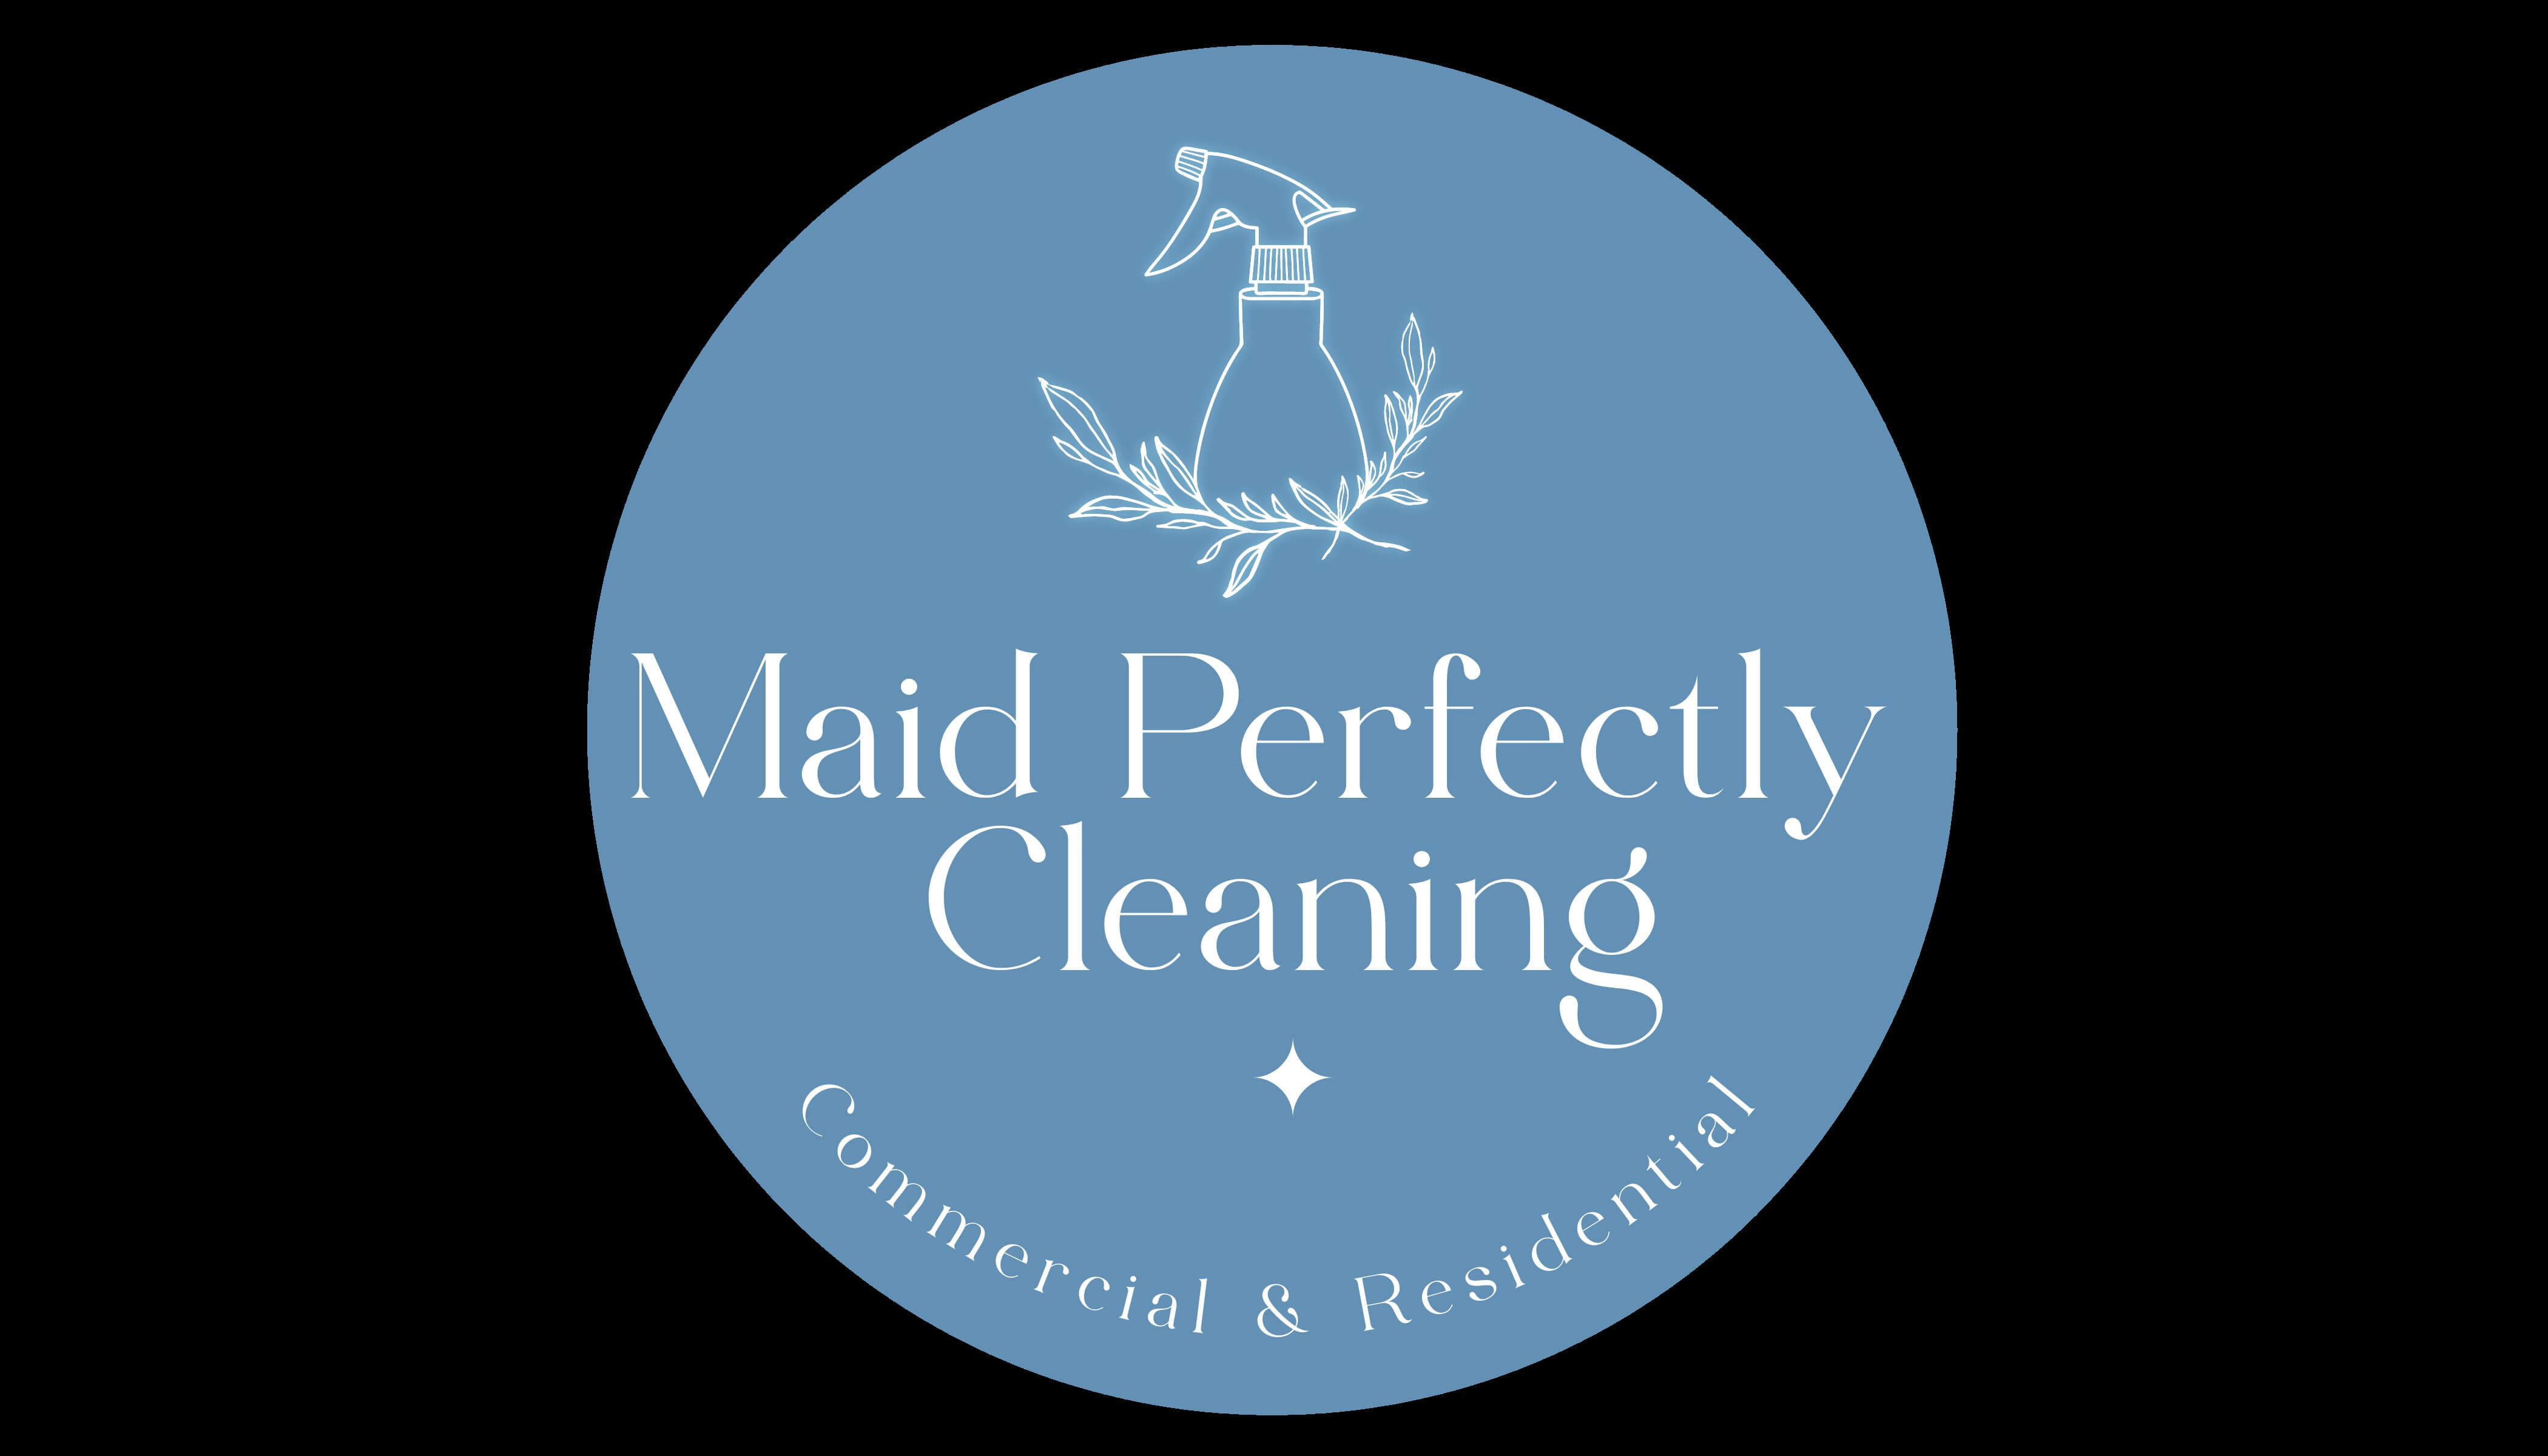 Maid Perfectly Cleaning, LLC